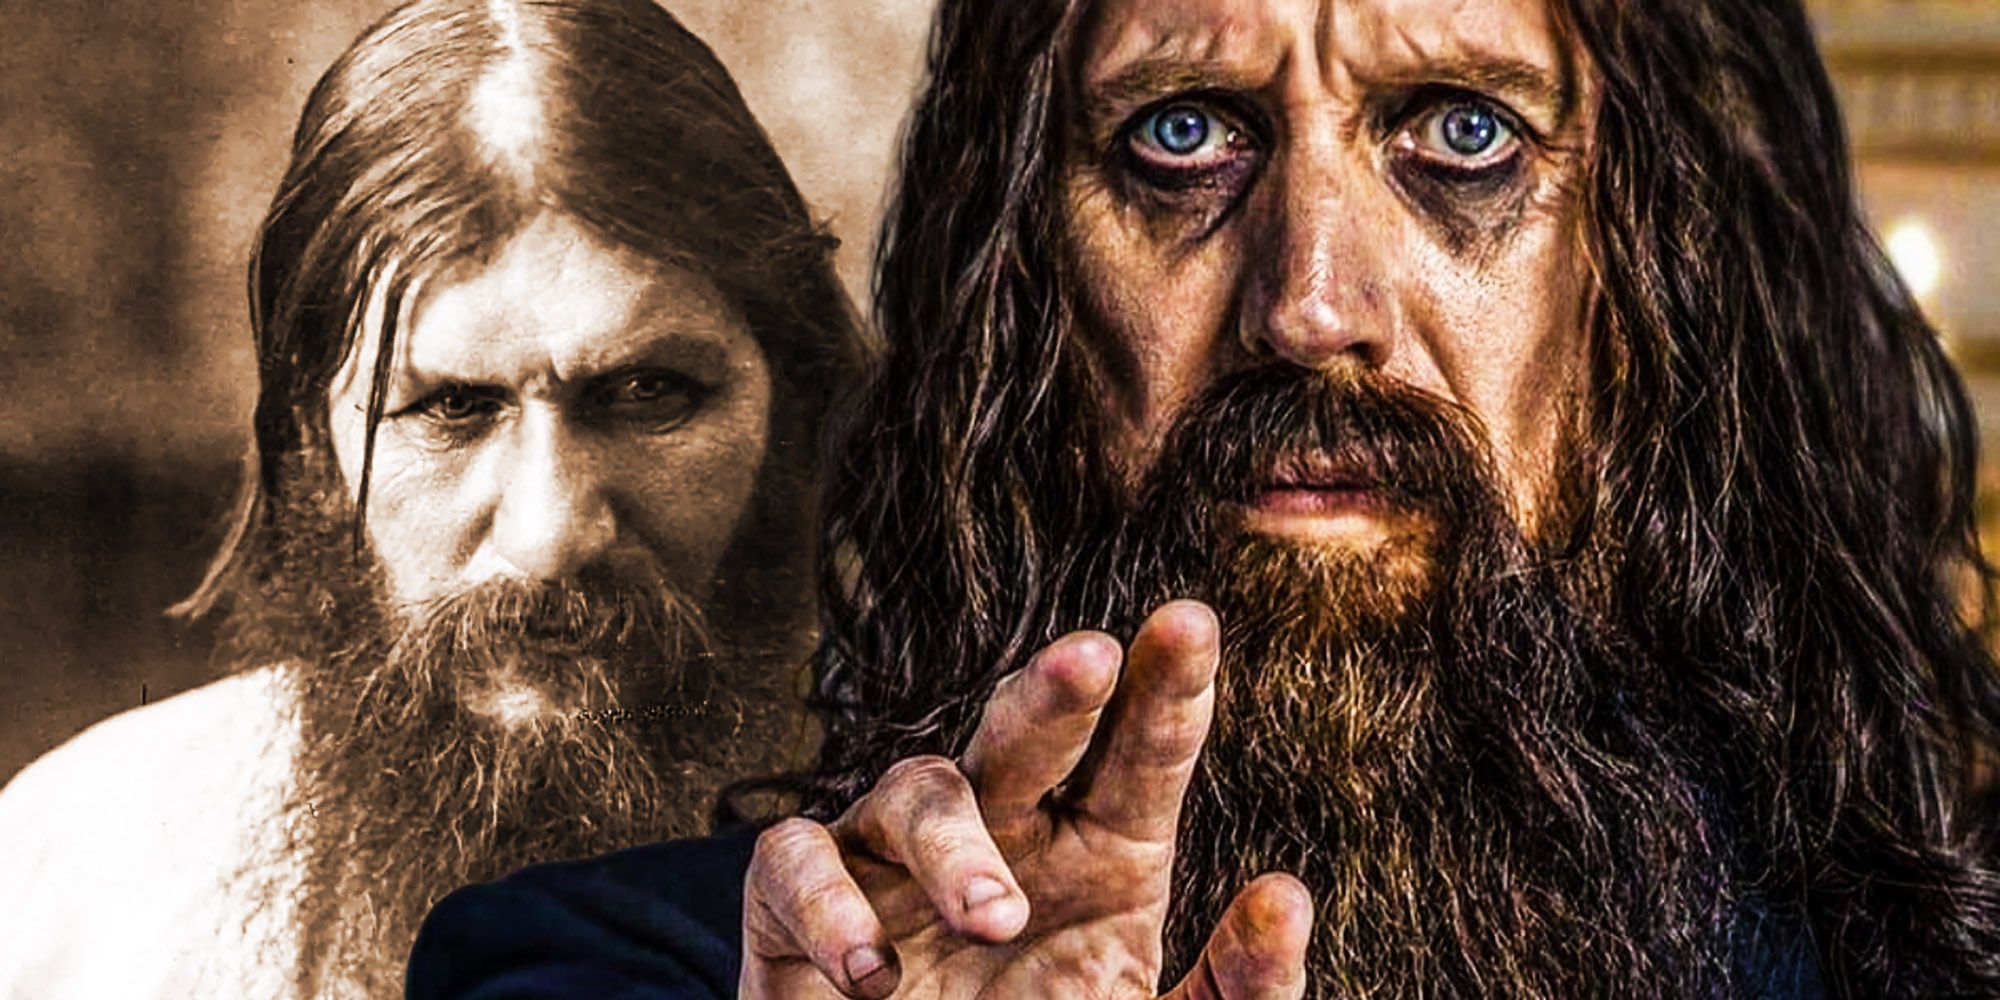 the Kings Man cast and real life character comparison Rasputin